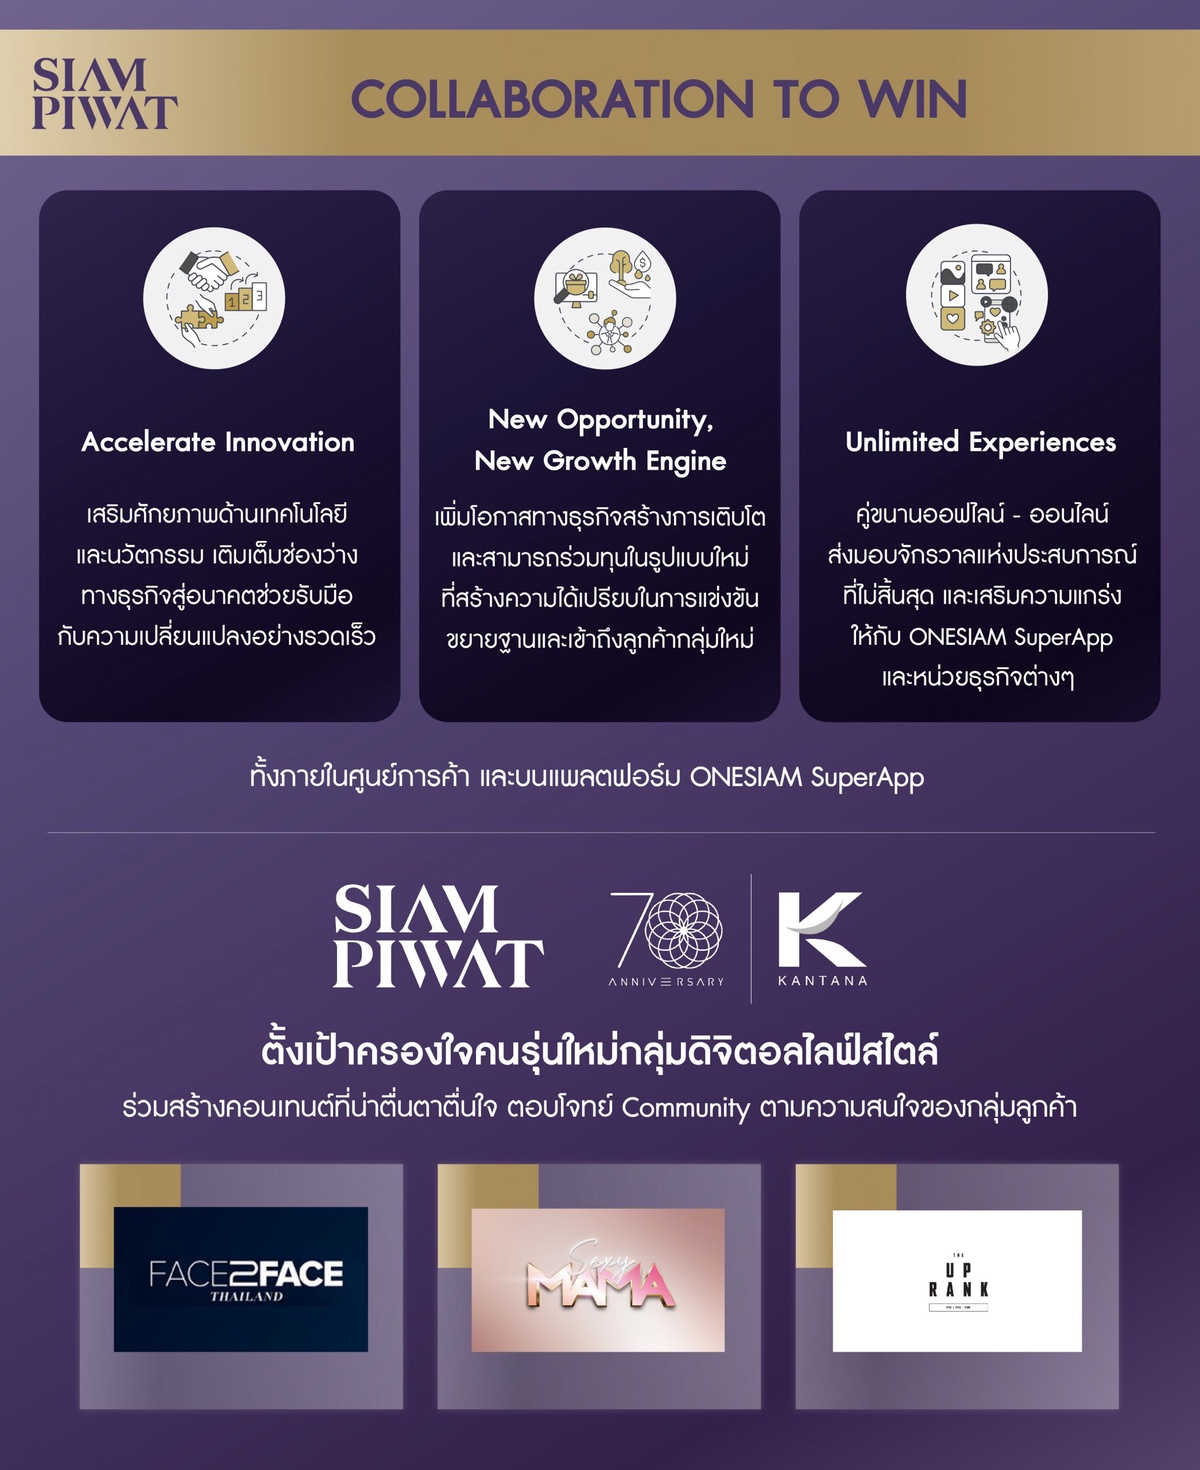 Siam Piwat joins forces with Kantana Group to strengthen business ecosystem, leveraging 'Collaboration to Win' strategy